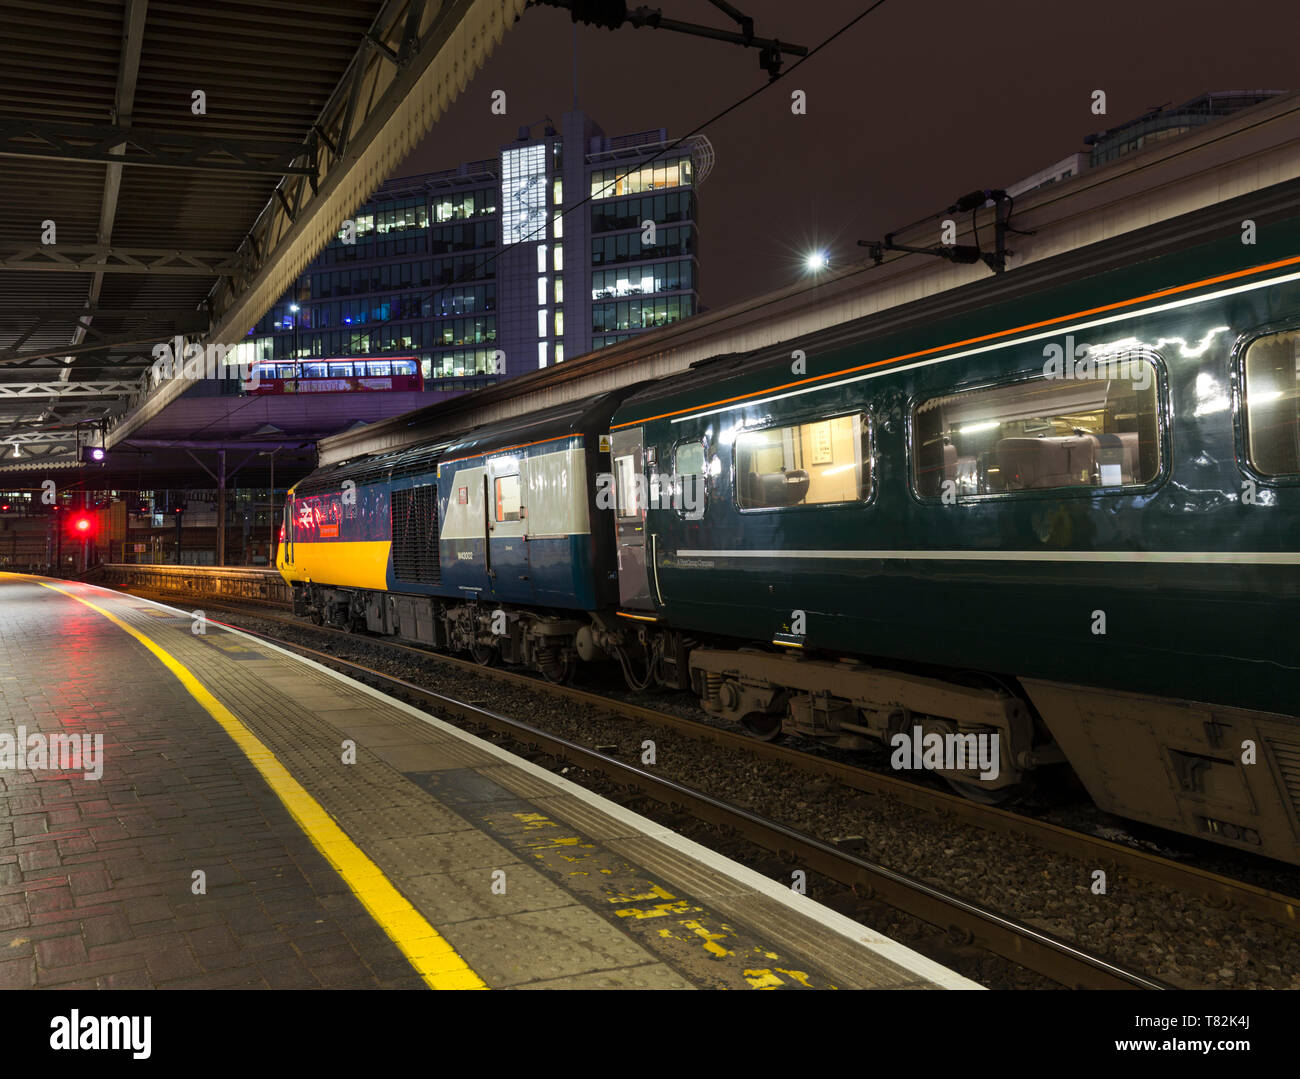 Carrying the original inter-city 125 livery applied to mark the run down of the fleet,  43002 Sir Kenneth Grange waits at London Paddington station Stock Photo